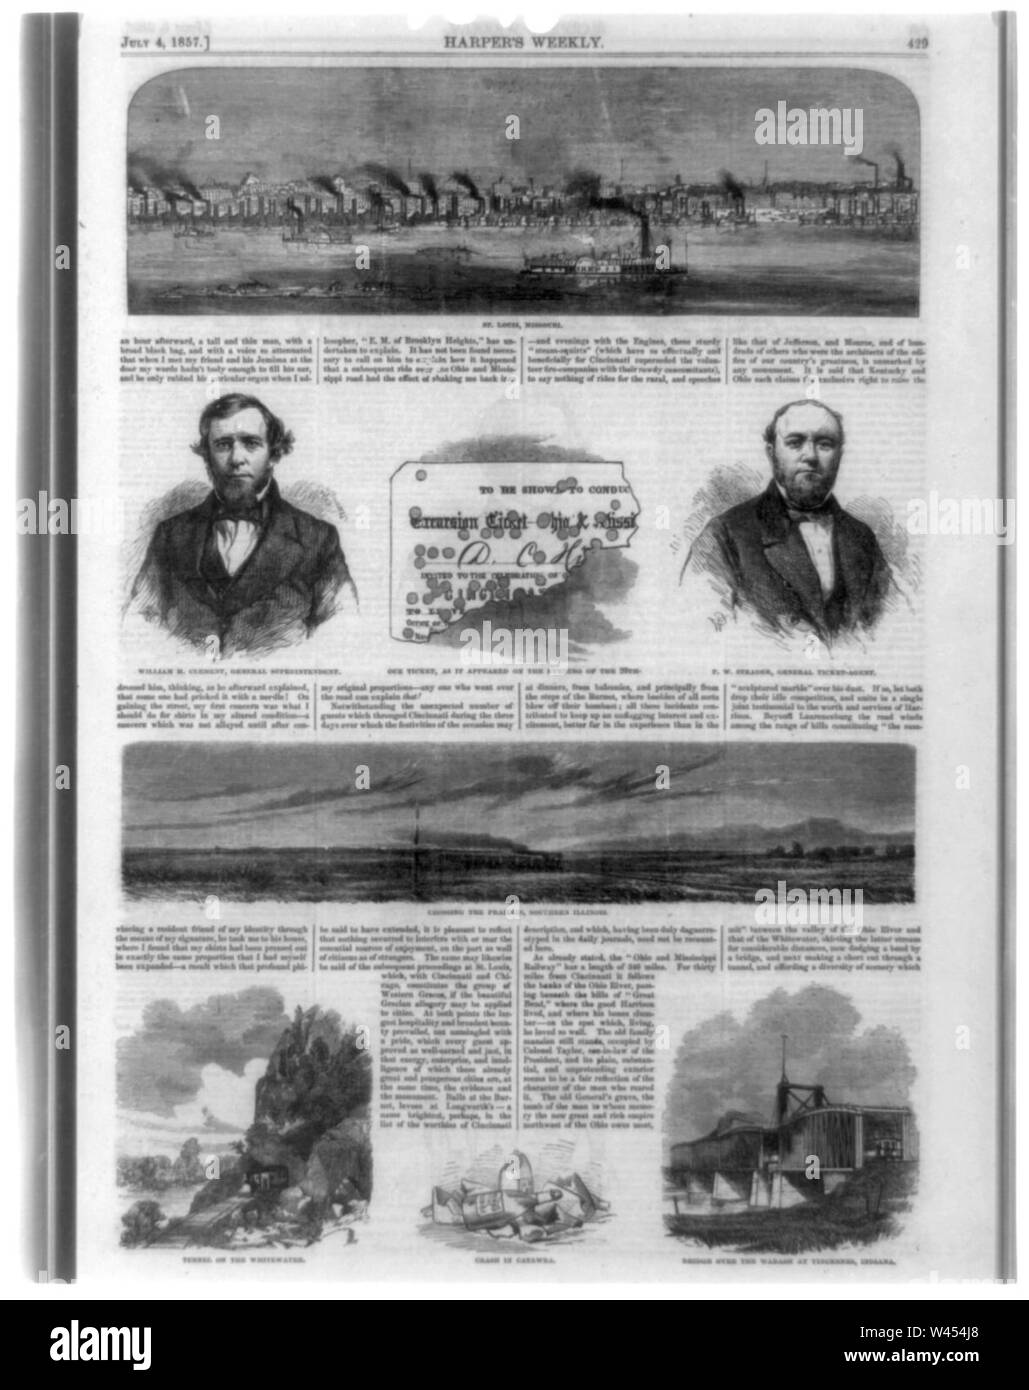 Composite of eight illustrations showing skyline view of St. Louis, Missouri, portraits of William H. Clement and P.W. Strader, train crossing the prairies, southern Illinois, tunnel on the Stock Photo